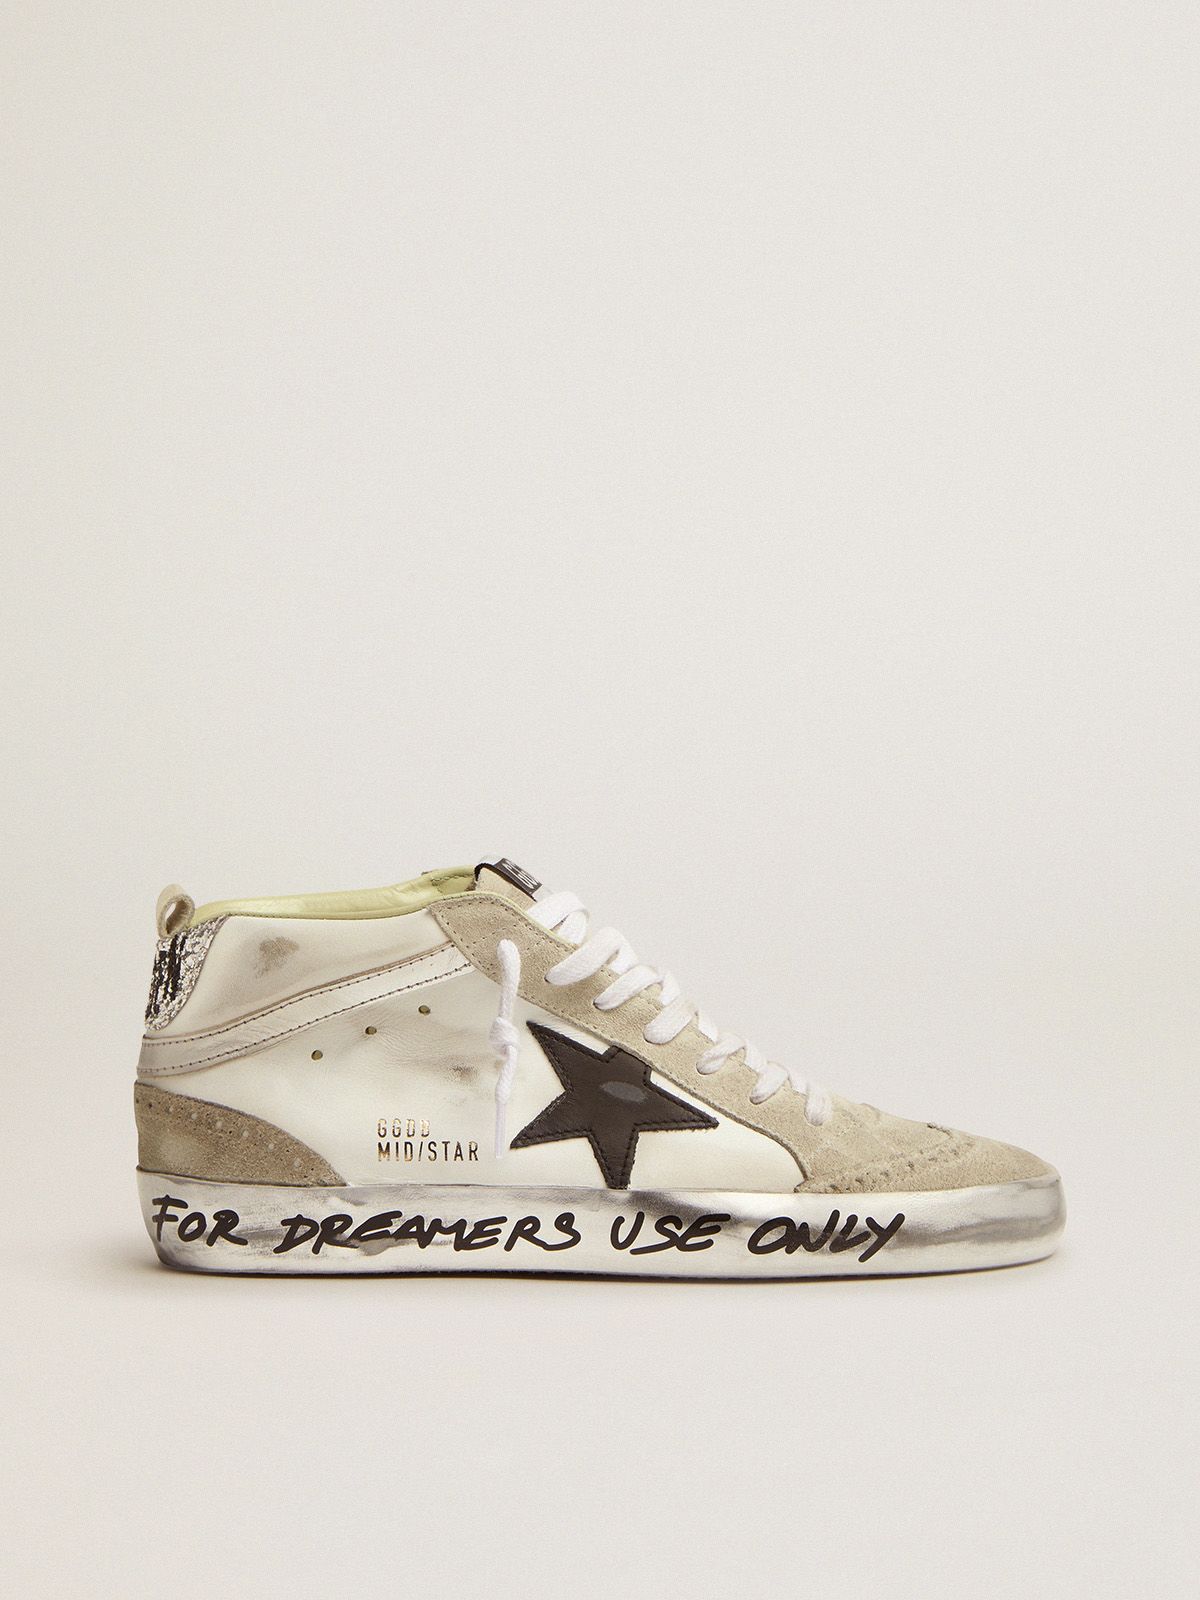 Golden Goose Sneakers Uomo Mid Star LTD sneakers with silver glitter heel tab and handwritten lettering on the foxing